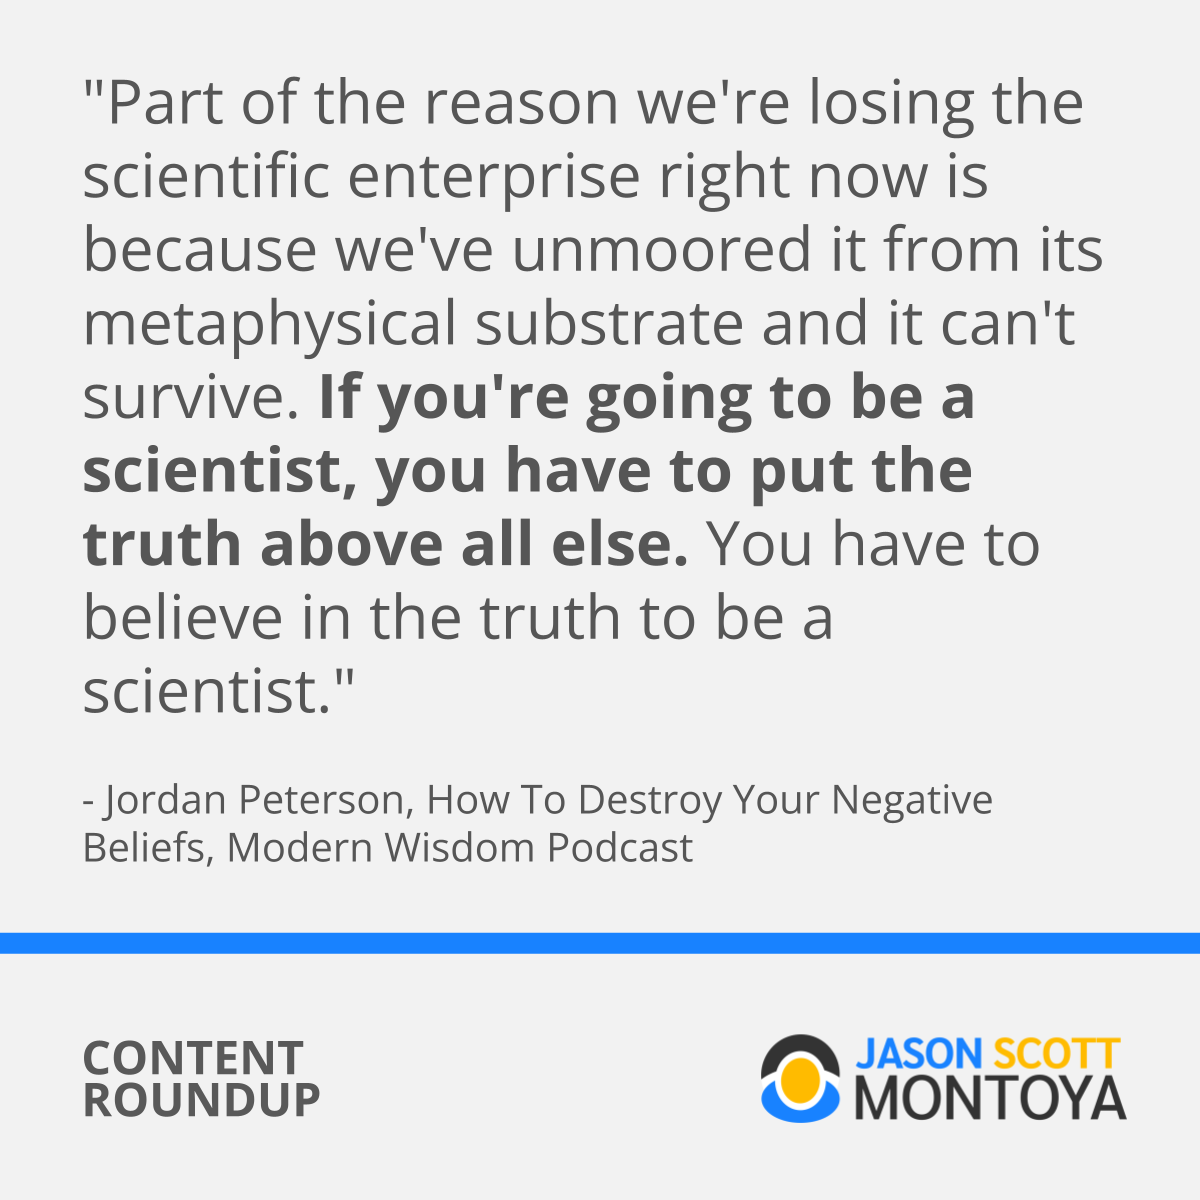 "Part of the reason we're losing the scientific enterprise right now is because we've unmoored it from its metaphysical substrate and it can't survive. If you're going to be a scientist, you have to put the truth above all else. You have to believe in the truth to be a scientist."  - Jordan Peterson, How To Destroy Your Negative Beliefs, Modern Wisdom Podcast